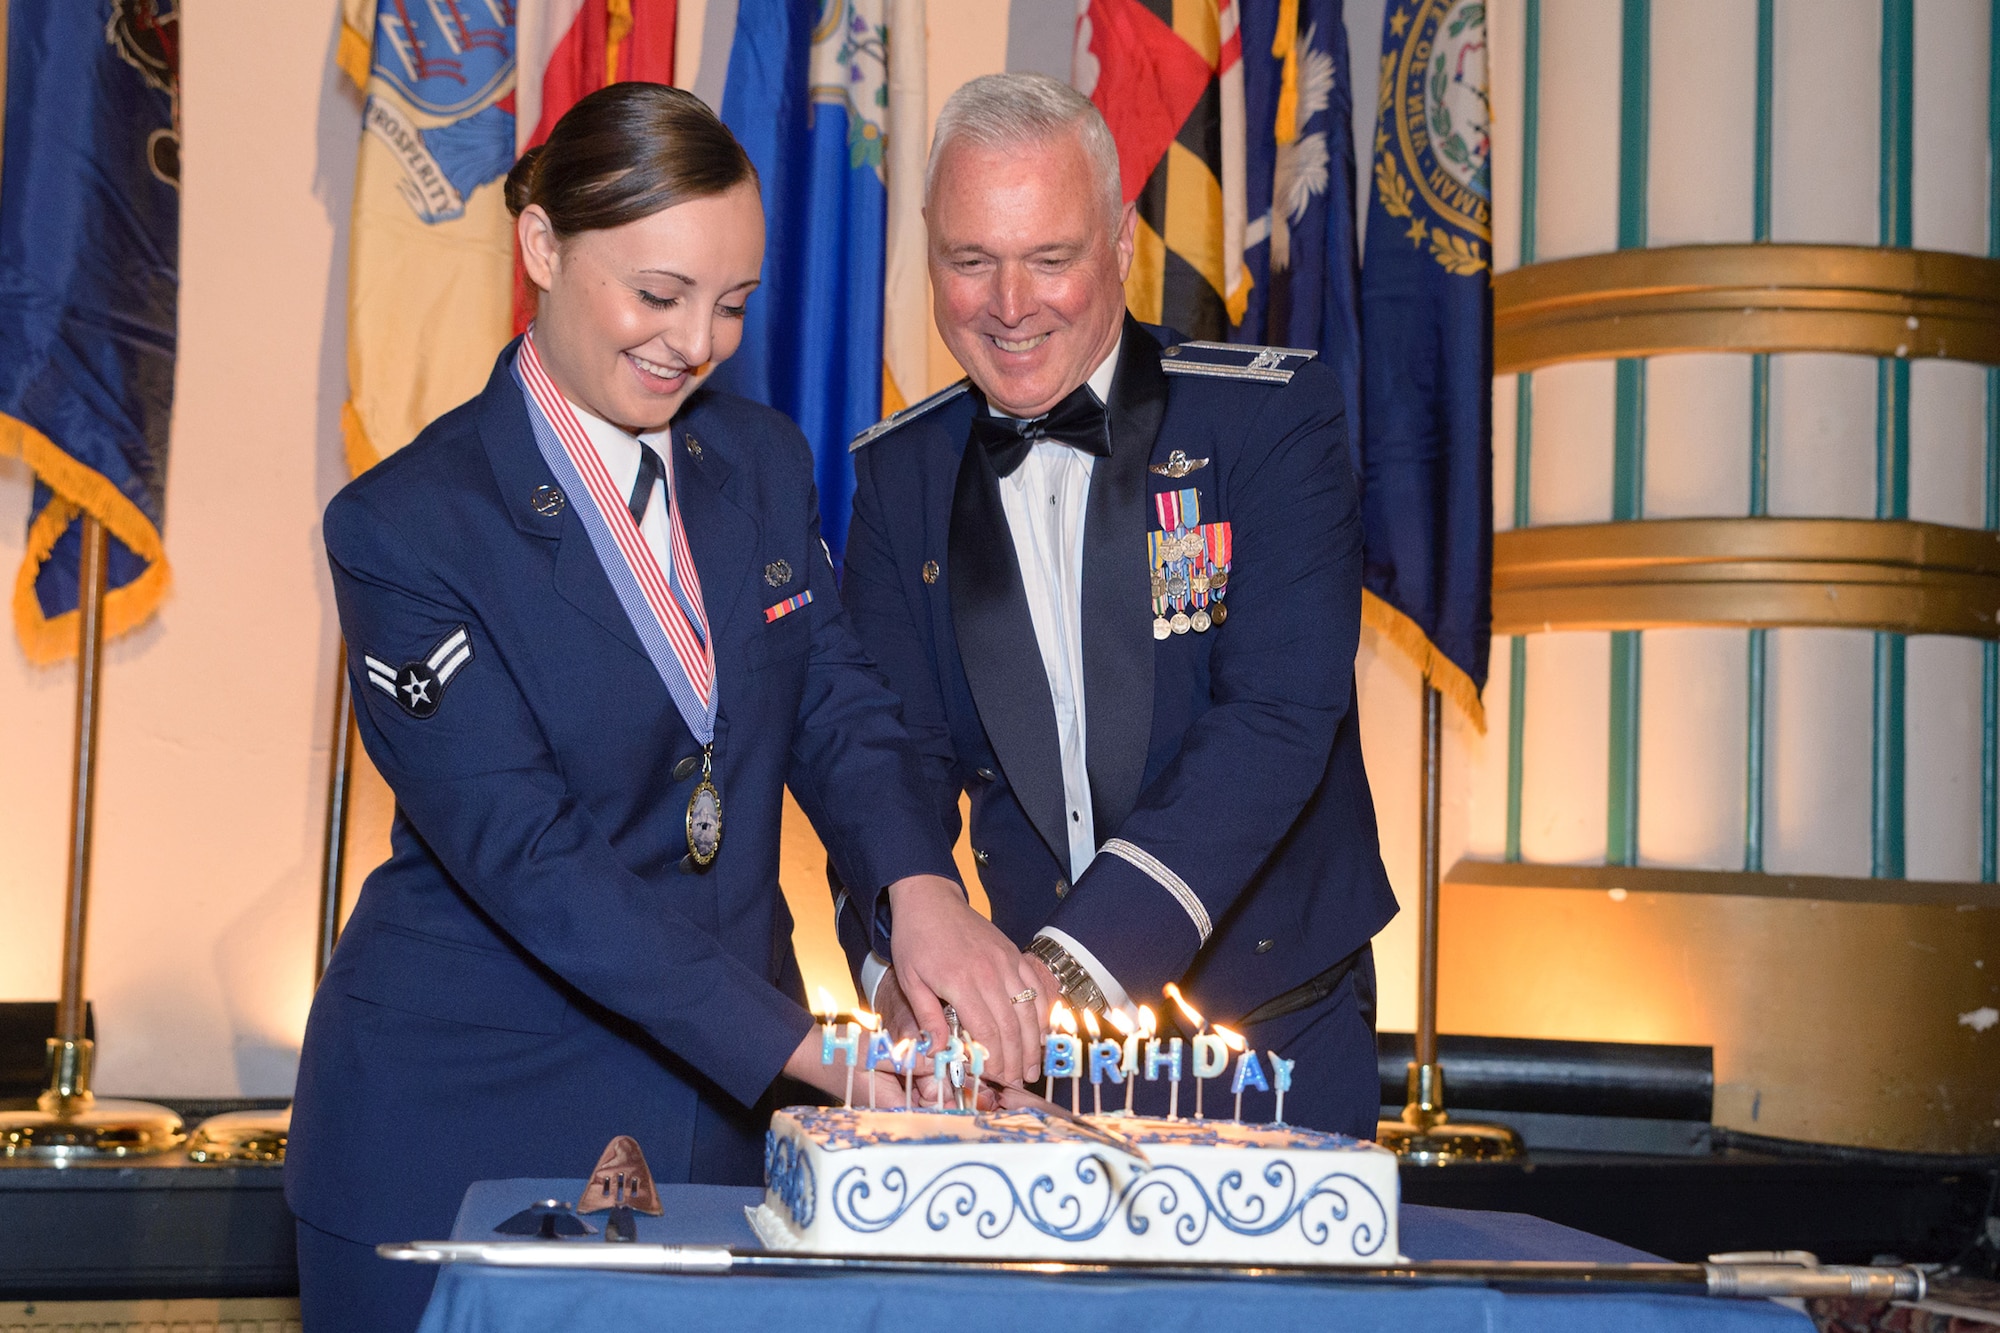 Airman 1st Class Abby Elliot, 446th Aircraft Maintenance Squadron, assists Col. Scott McLaughlin, 446th Airlift Wing commander, in cutting the cake at the 2015 446th Airlift Wing Awards Banquet April 11 at the Landmark Convention Center, Tacoma. (Courtesy photo by David Lobban Photography)